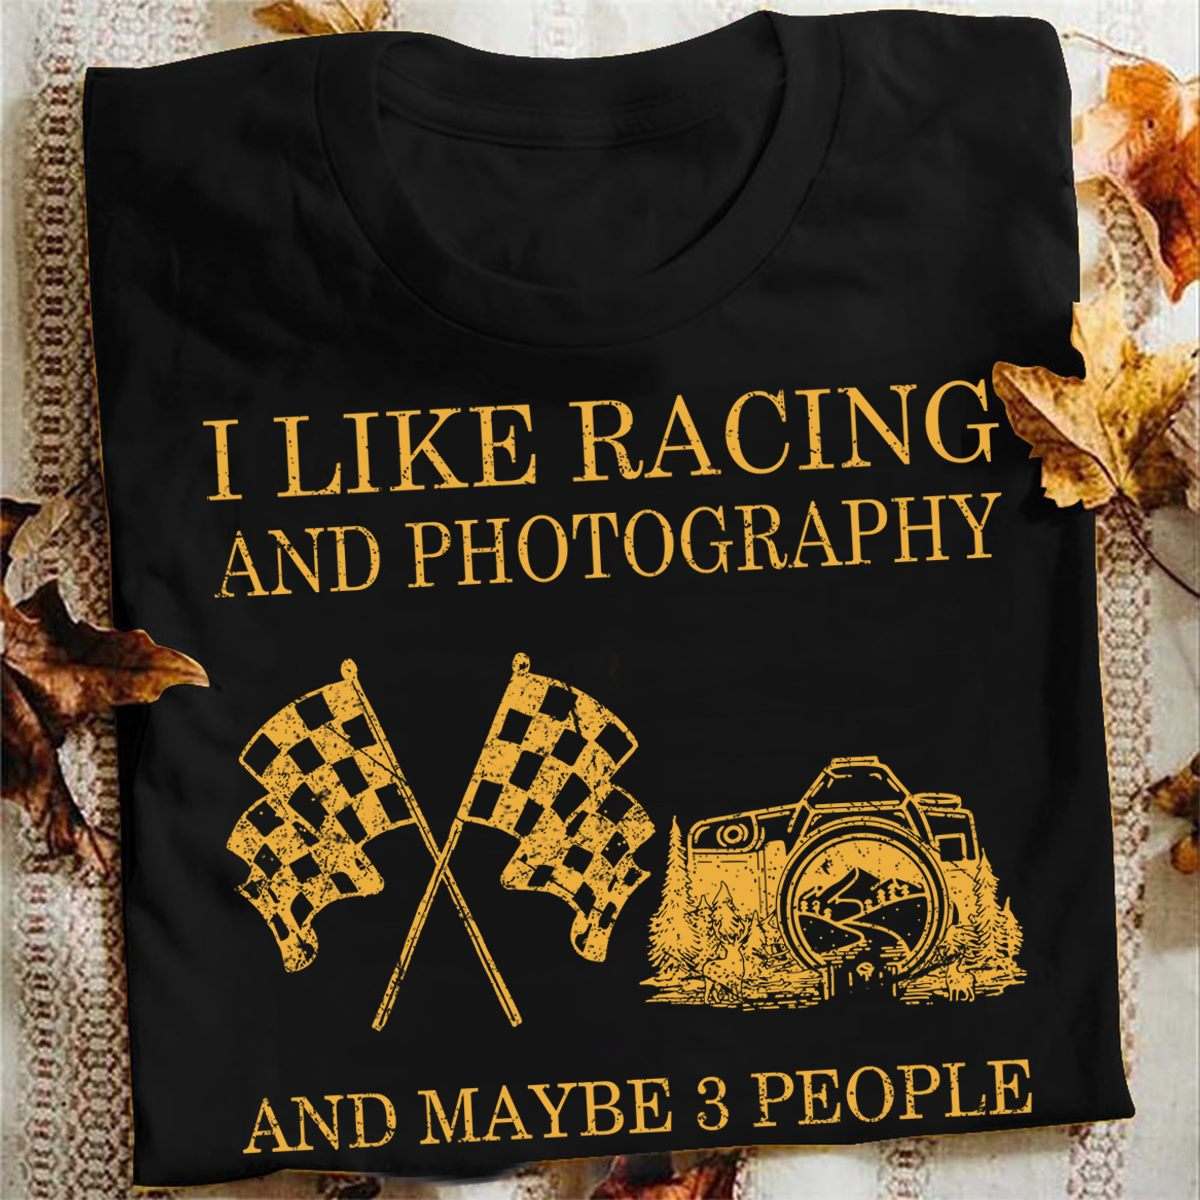 I like racing and photography and maybe 3 people